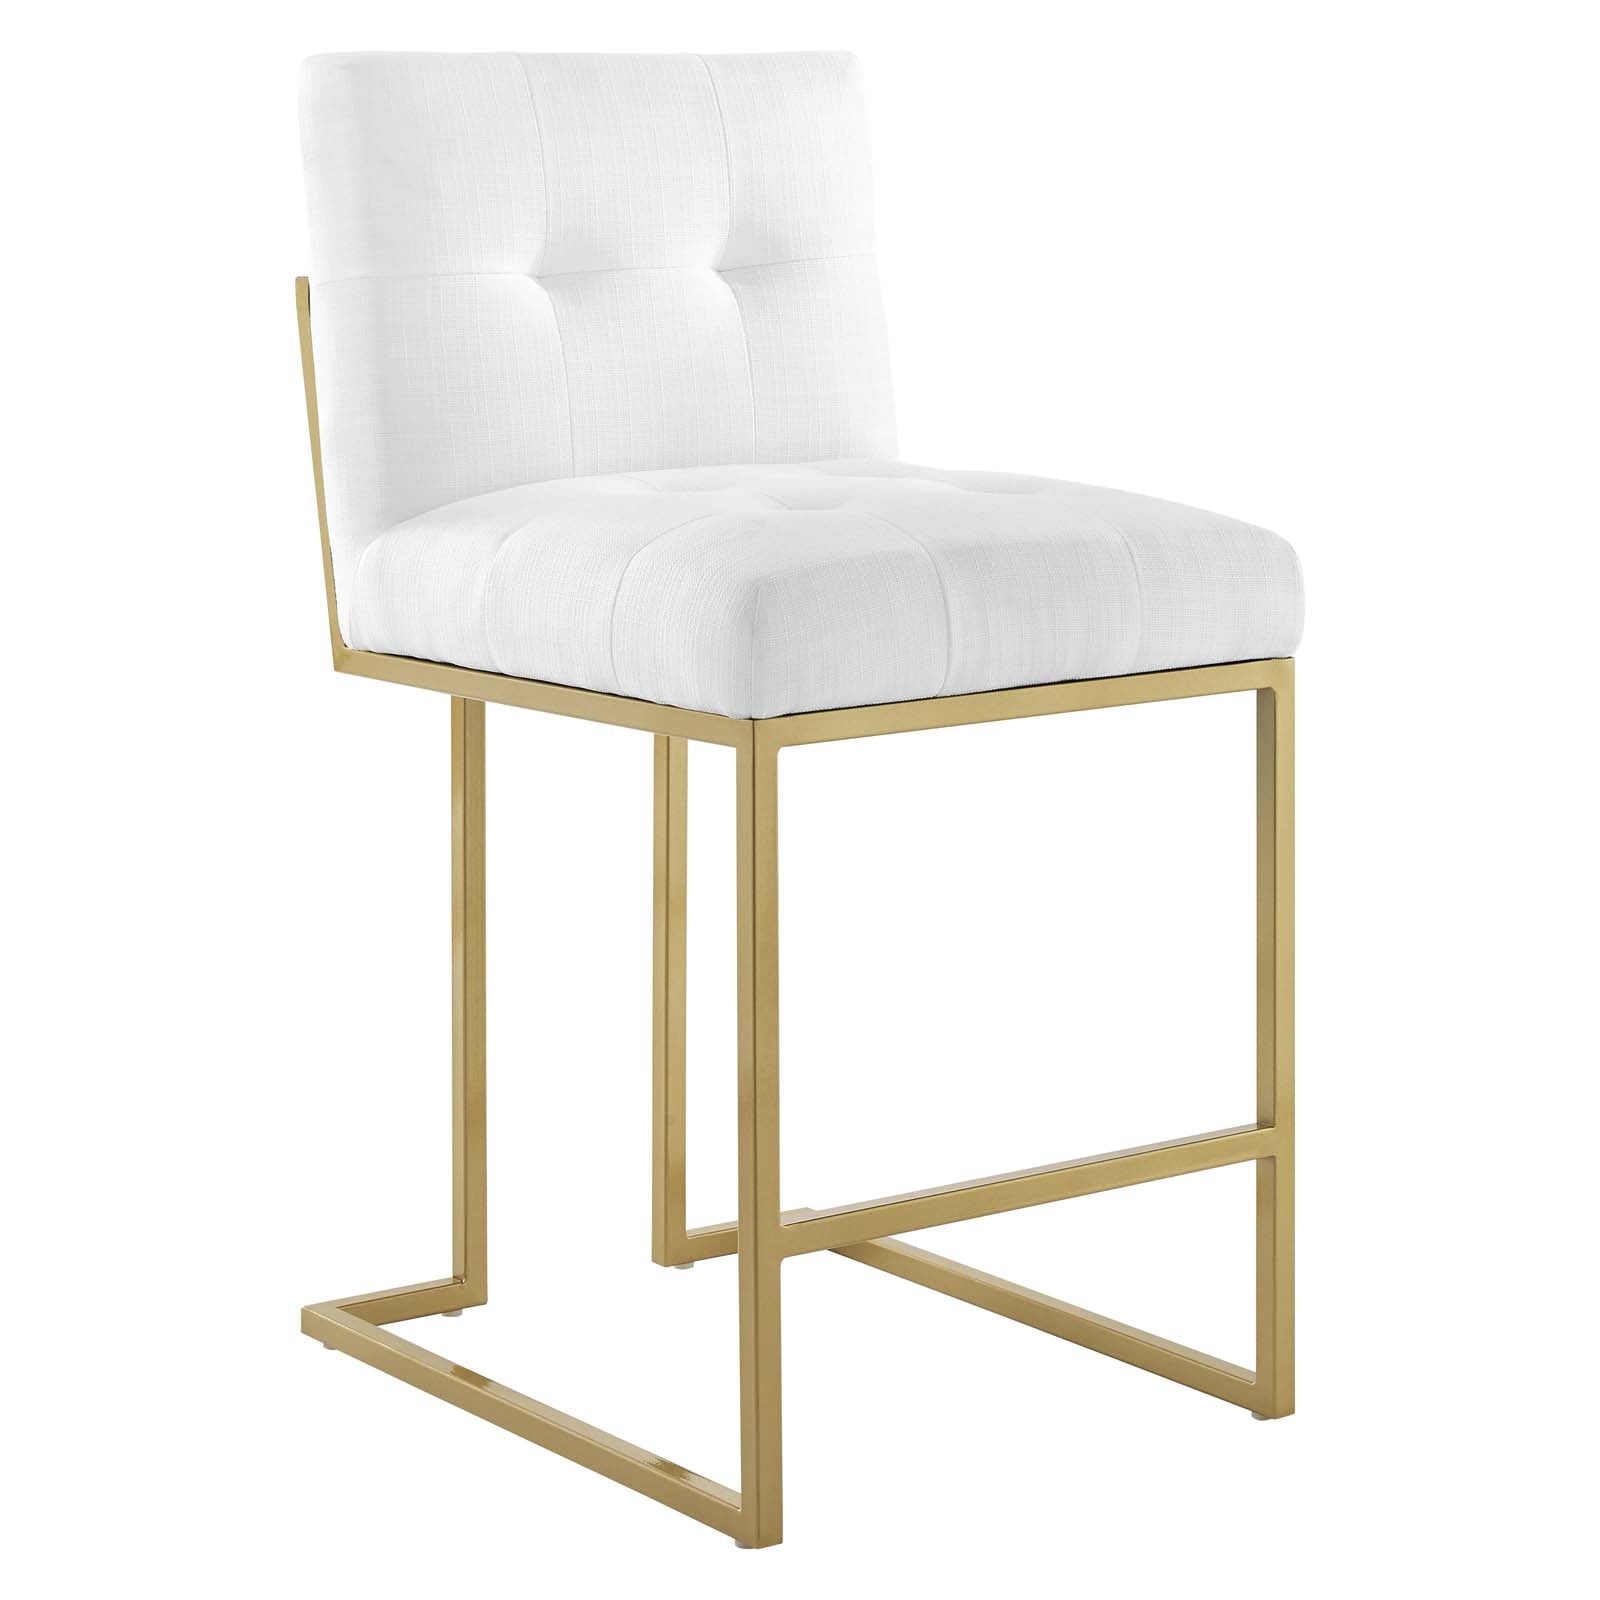 Modway Barstools - Privy Gold Stainless Steel Upholstered Fabric Counter Stool Gold White